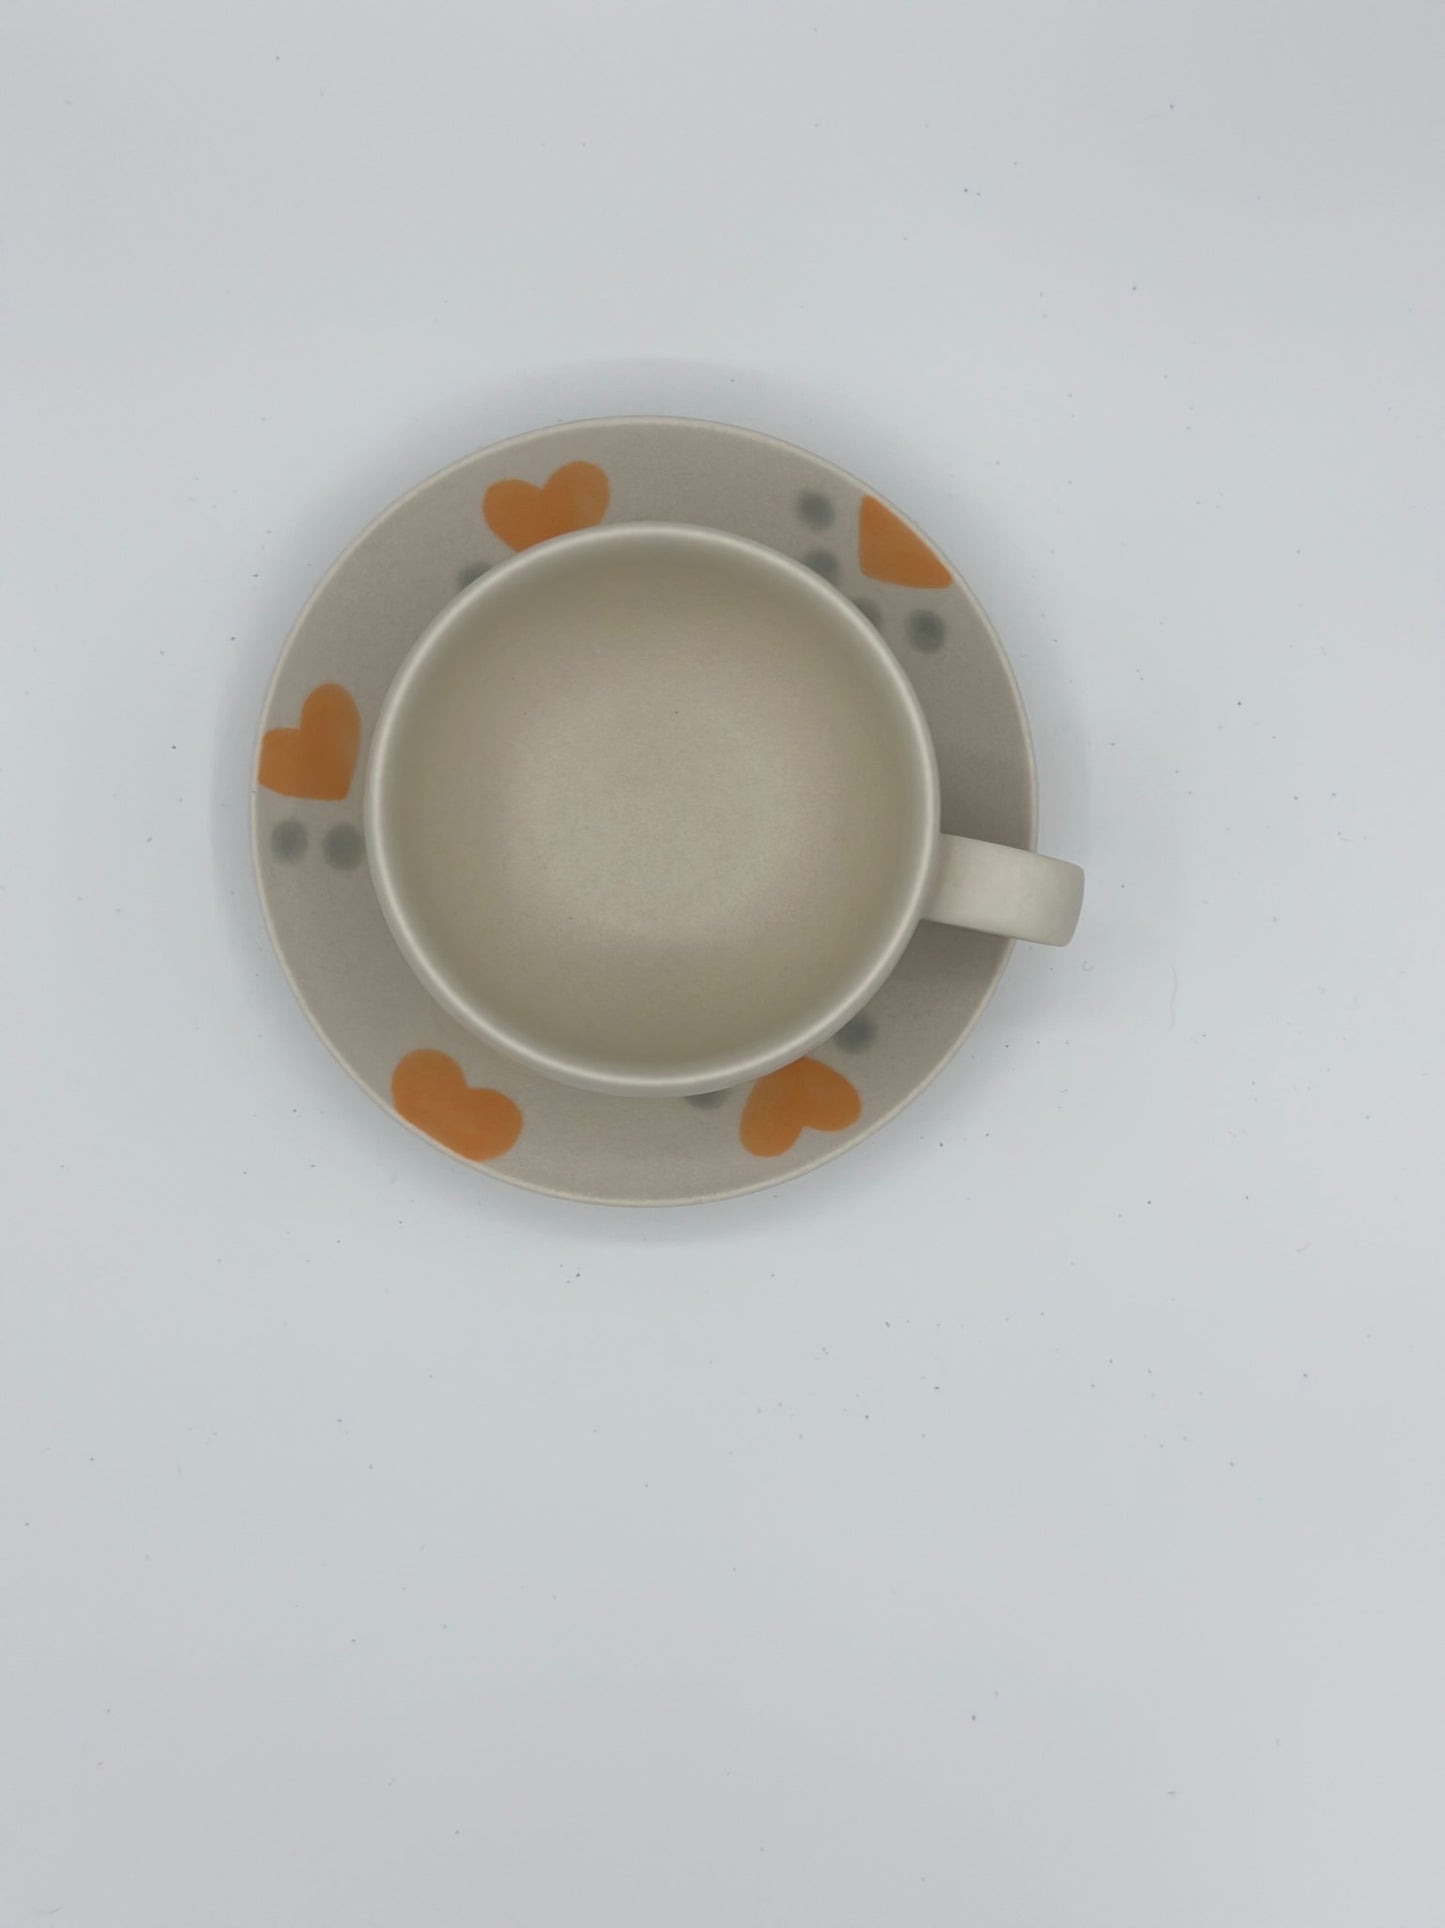 Yezi's Handcrafted Meow Cup and Saucer Set